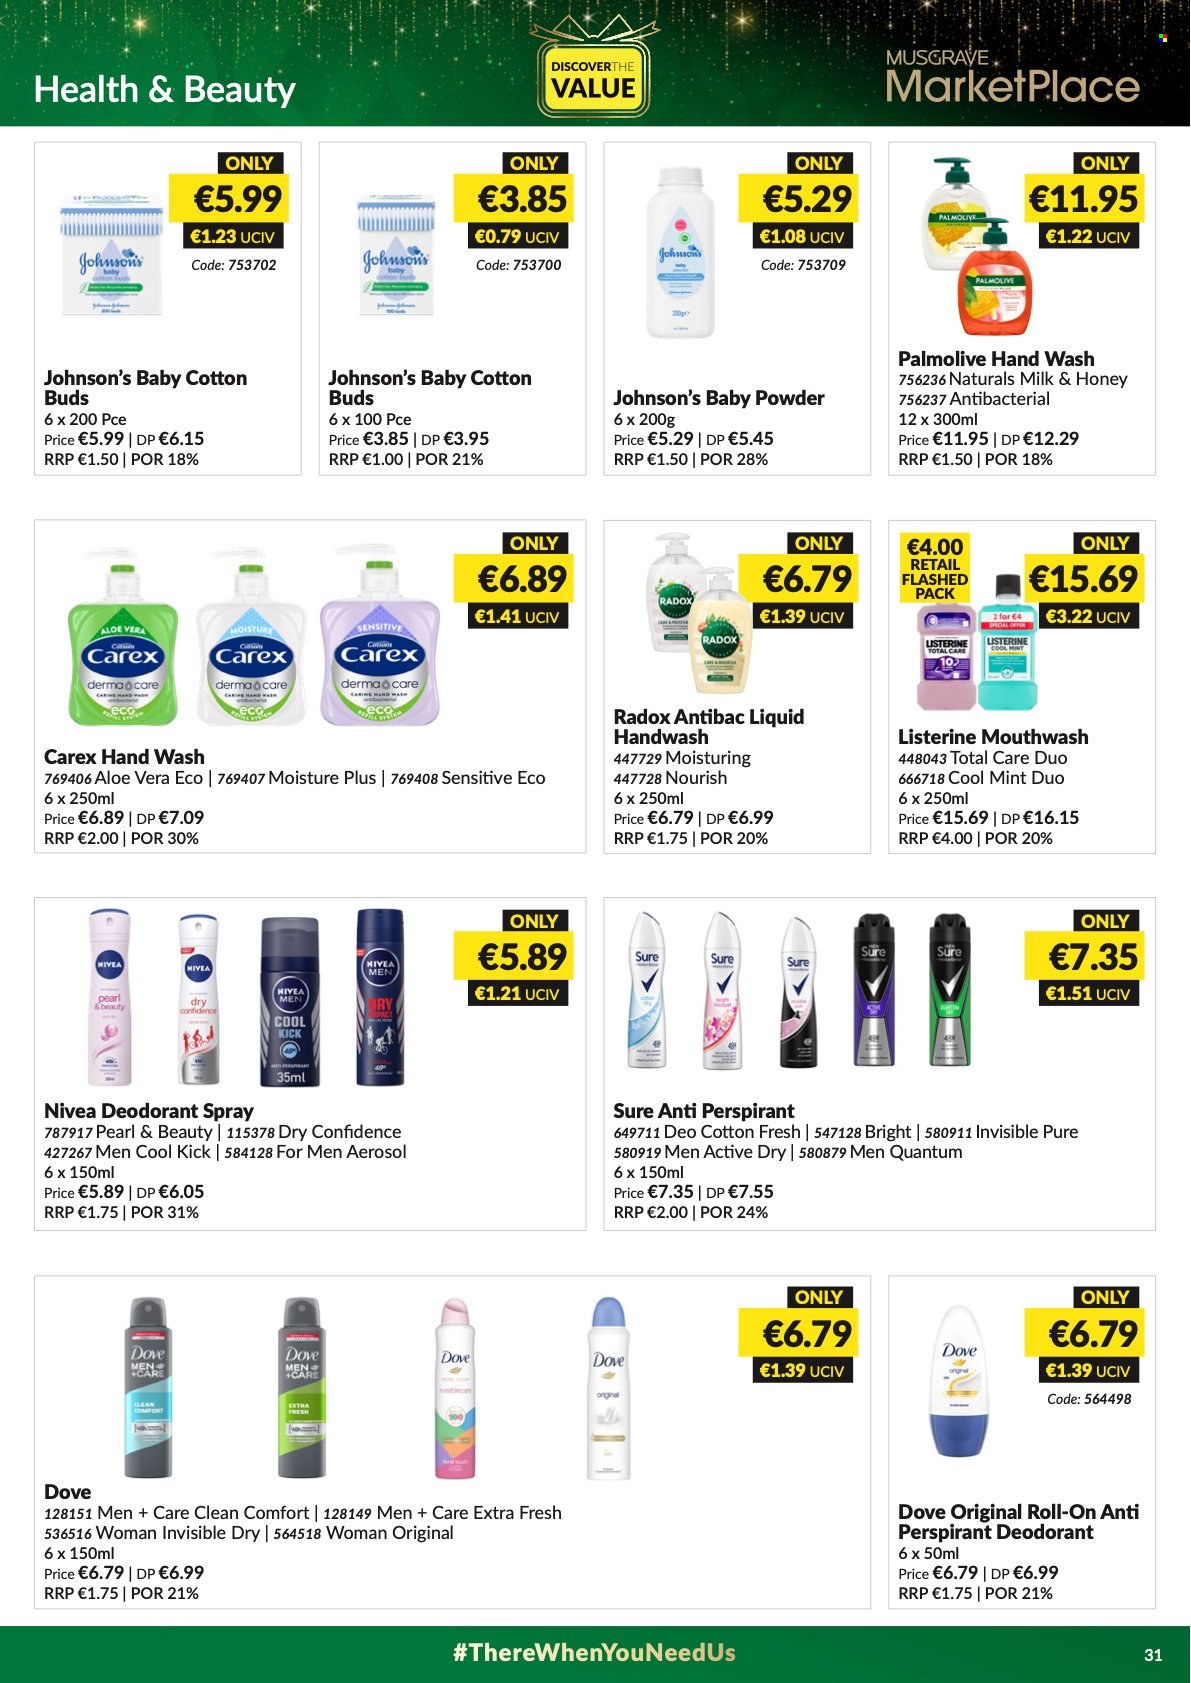 thumbnail - MUSGRAVE Market Place offer  - 24.10.2021 - 20.11.2021 - Sales products - milk, honey, Johnson's, Nivea, baby powder, Dove, hand wash, Palmolive, Radox, Carex, Listerine, mouthwash, anti-perspirant, roll-on, Sure, deodorant. Page 31.